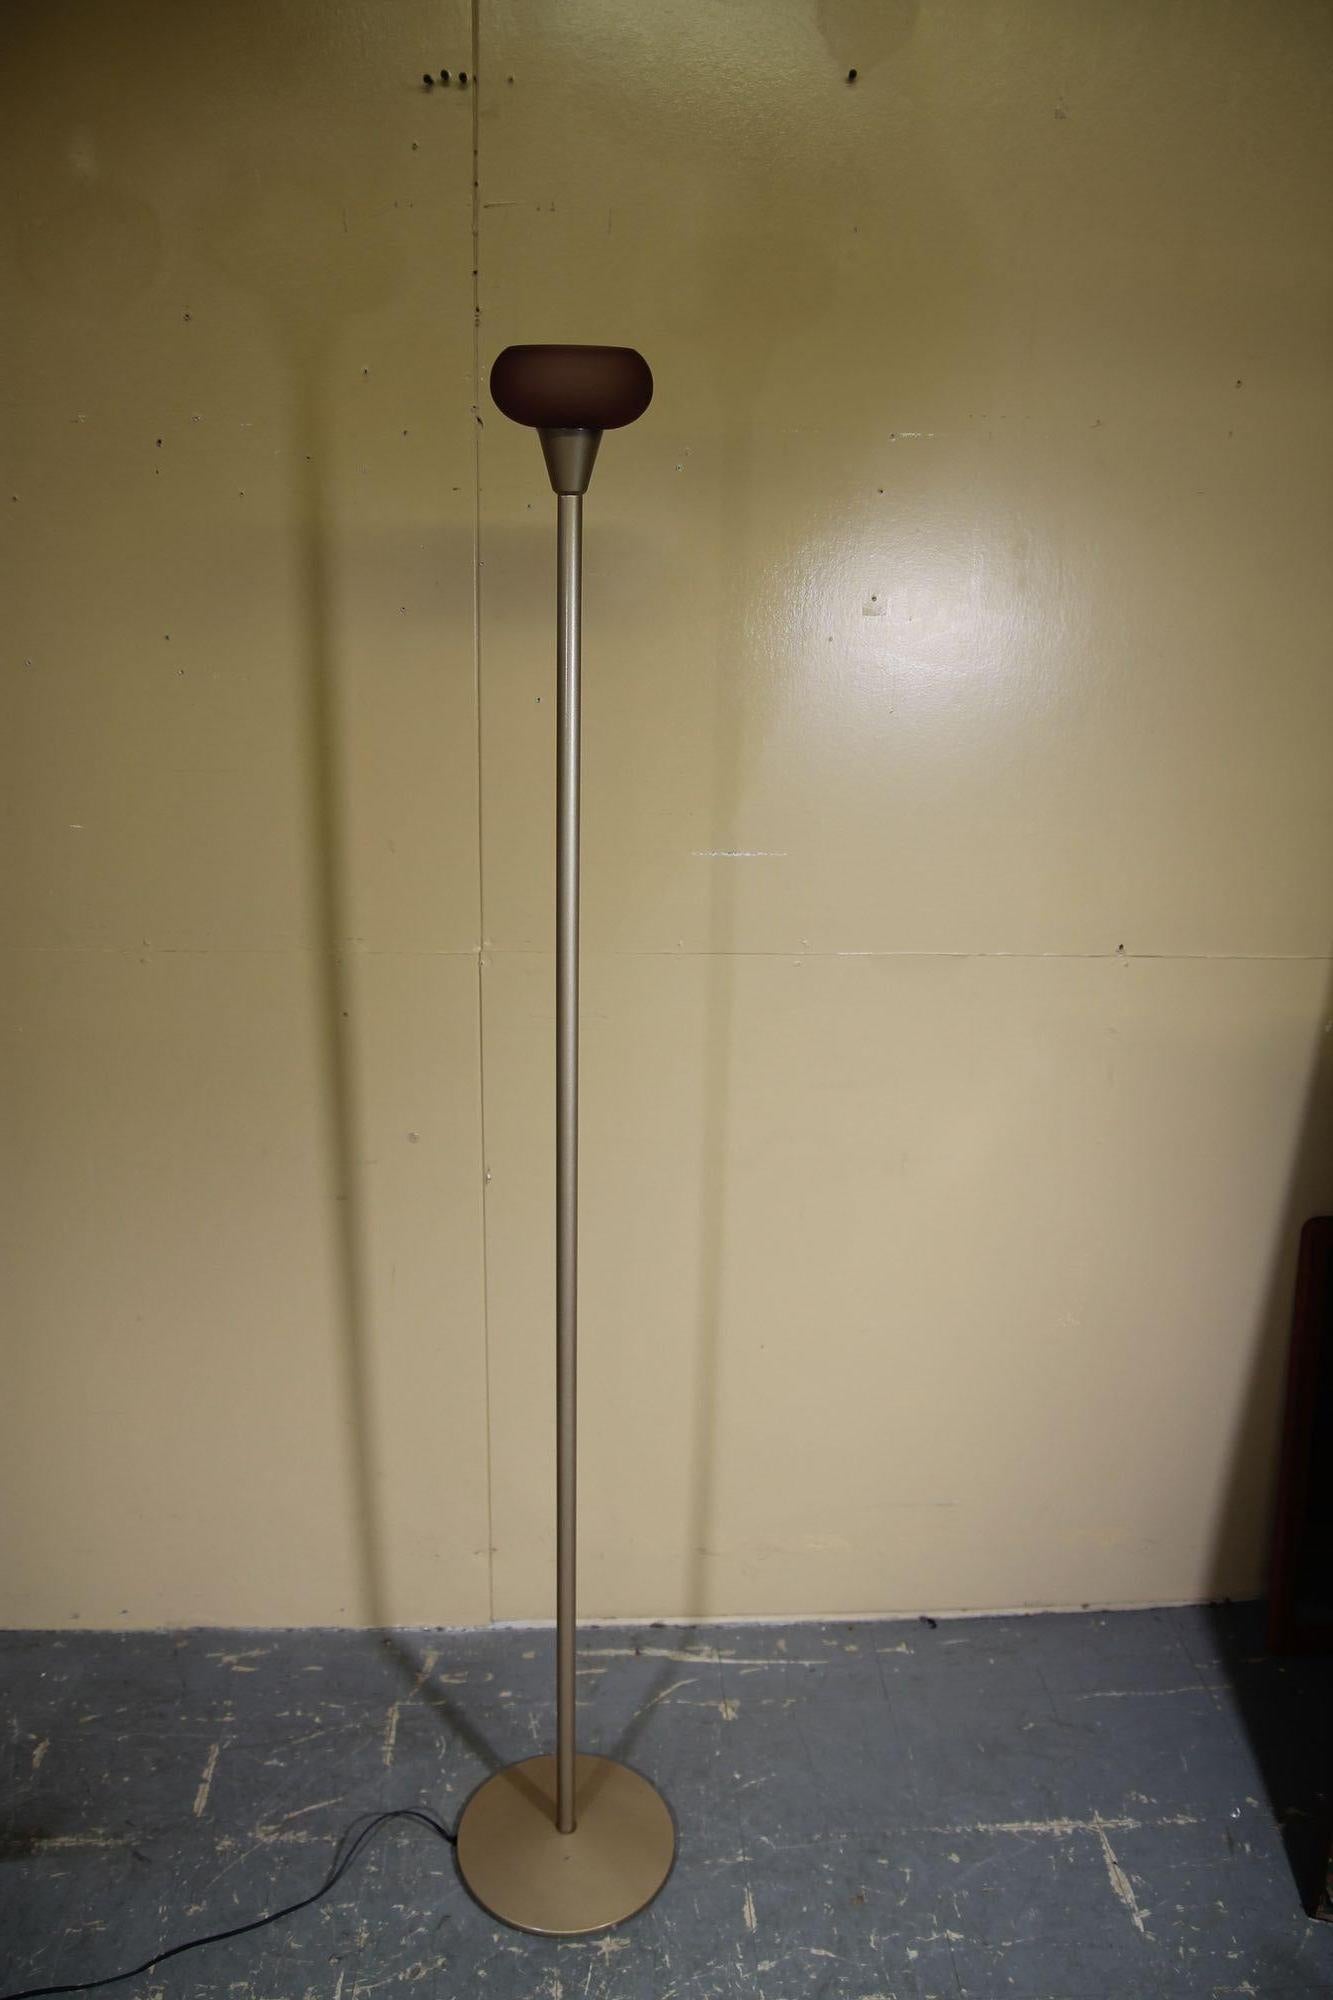 Rare Italian floor lamp by Leucos. This light gold base and rod look great with this small purple glass shade. This lamp comes with a dimmer switch. Shade is 5.5 in diameter and 2.5 tall. This lamp looks great in an decor. The lamp came from a long